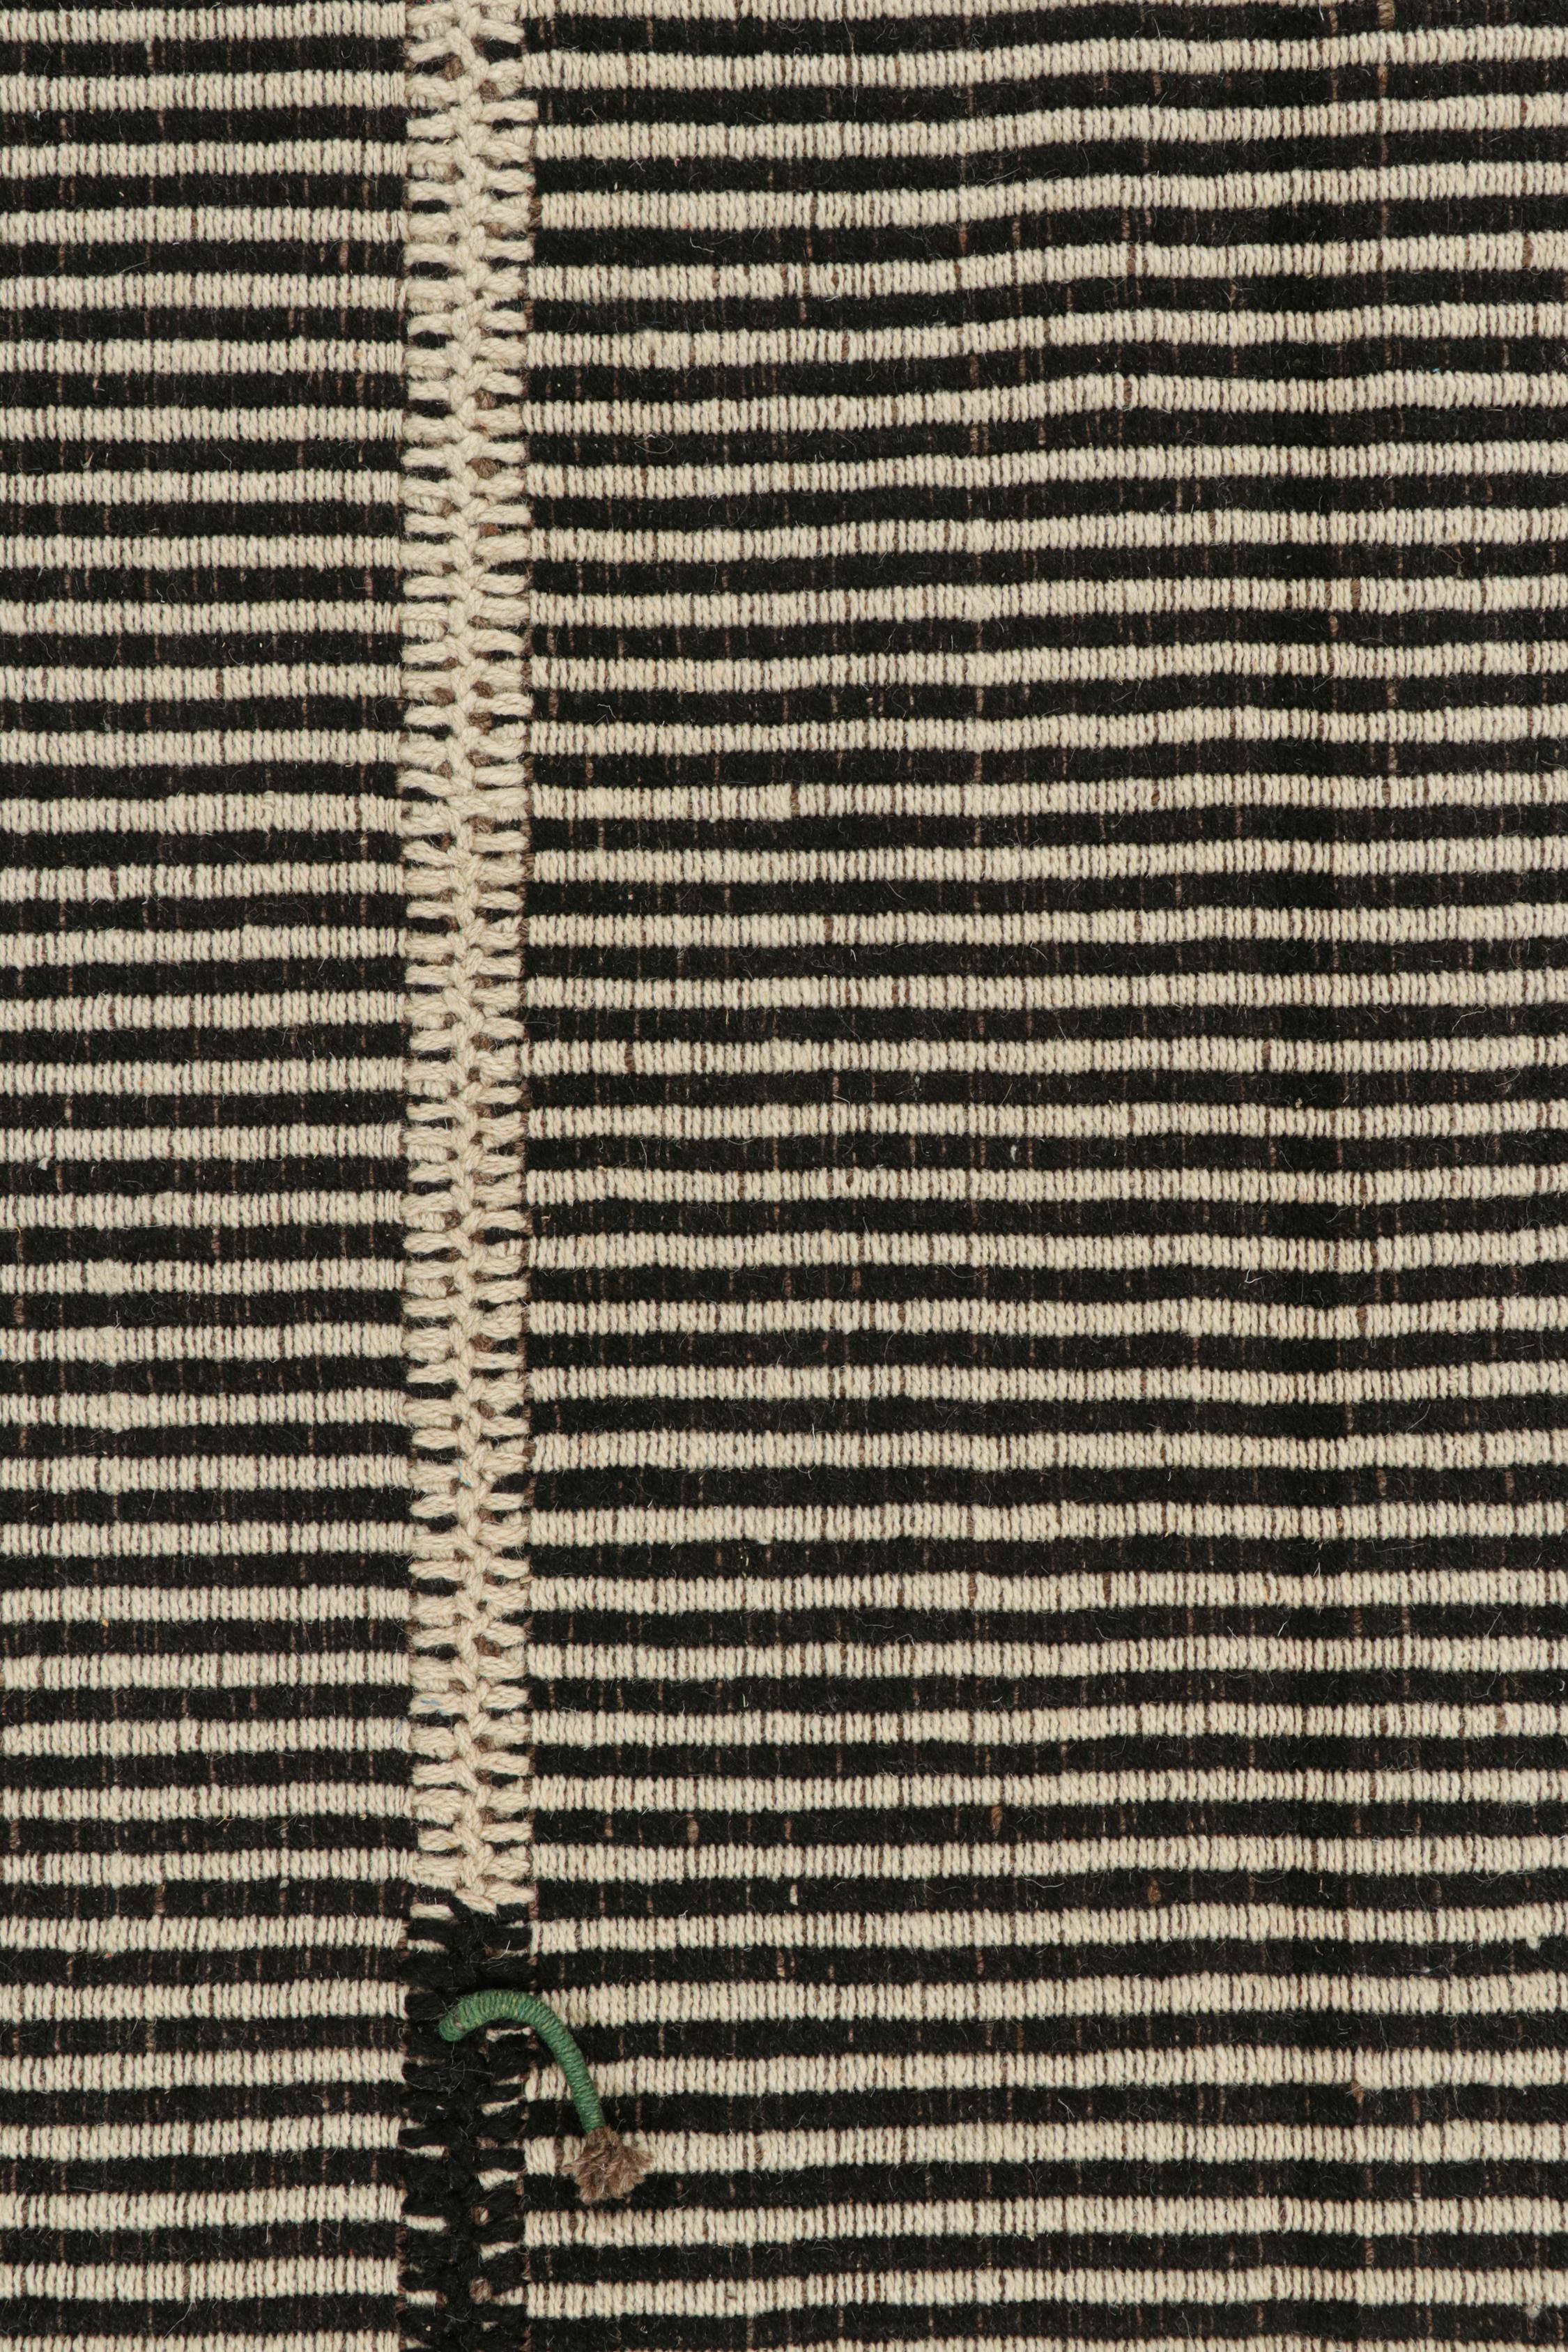 Rug & Kilim’s Contemporary Kilim Rug in Beige and Black Stripes In New Condition For Sale In Long Island City, NY